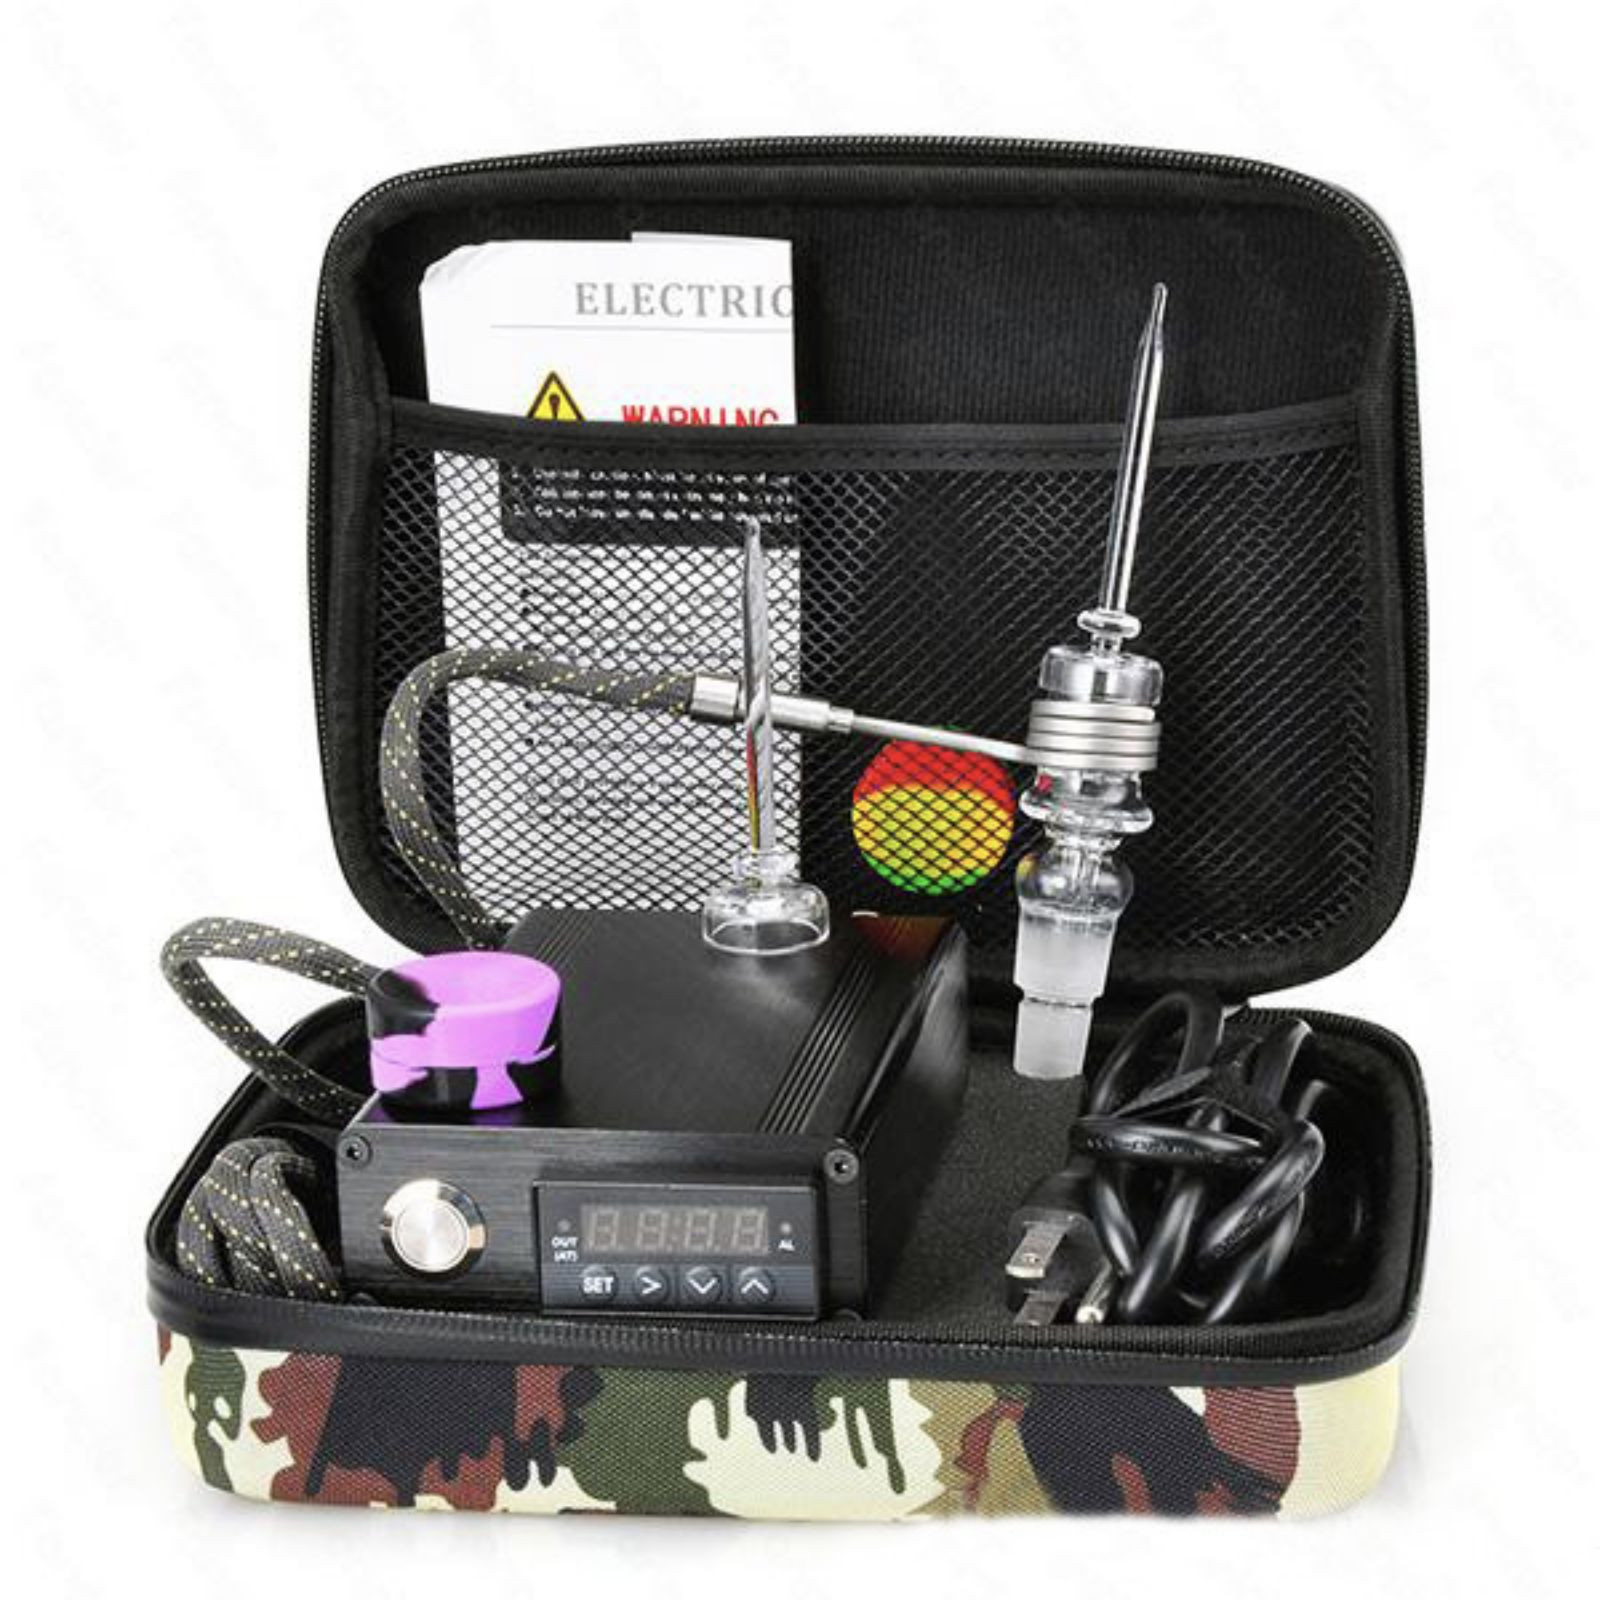 Electronic Enail Dab Kit [Complete Dab Kit] - Mr. Purple - Glass Water  Pipes, Bongs, RAW Cones/Papers, And Much More